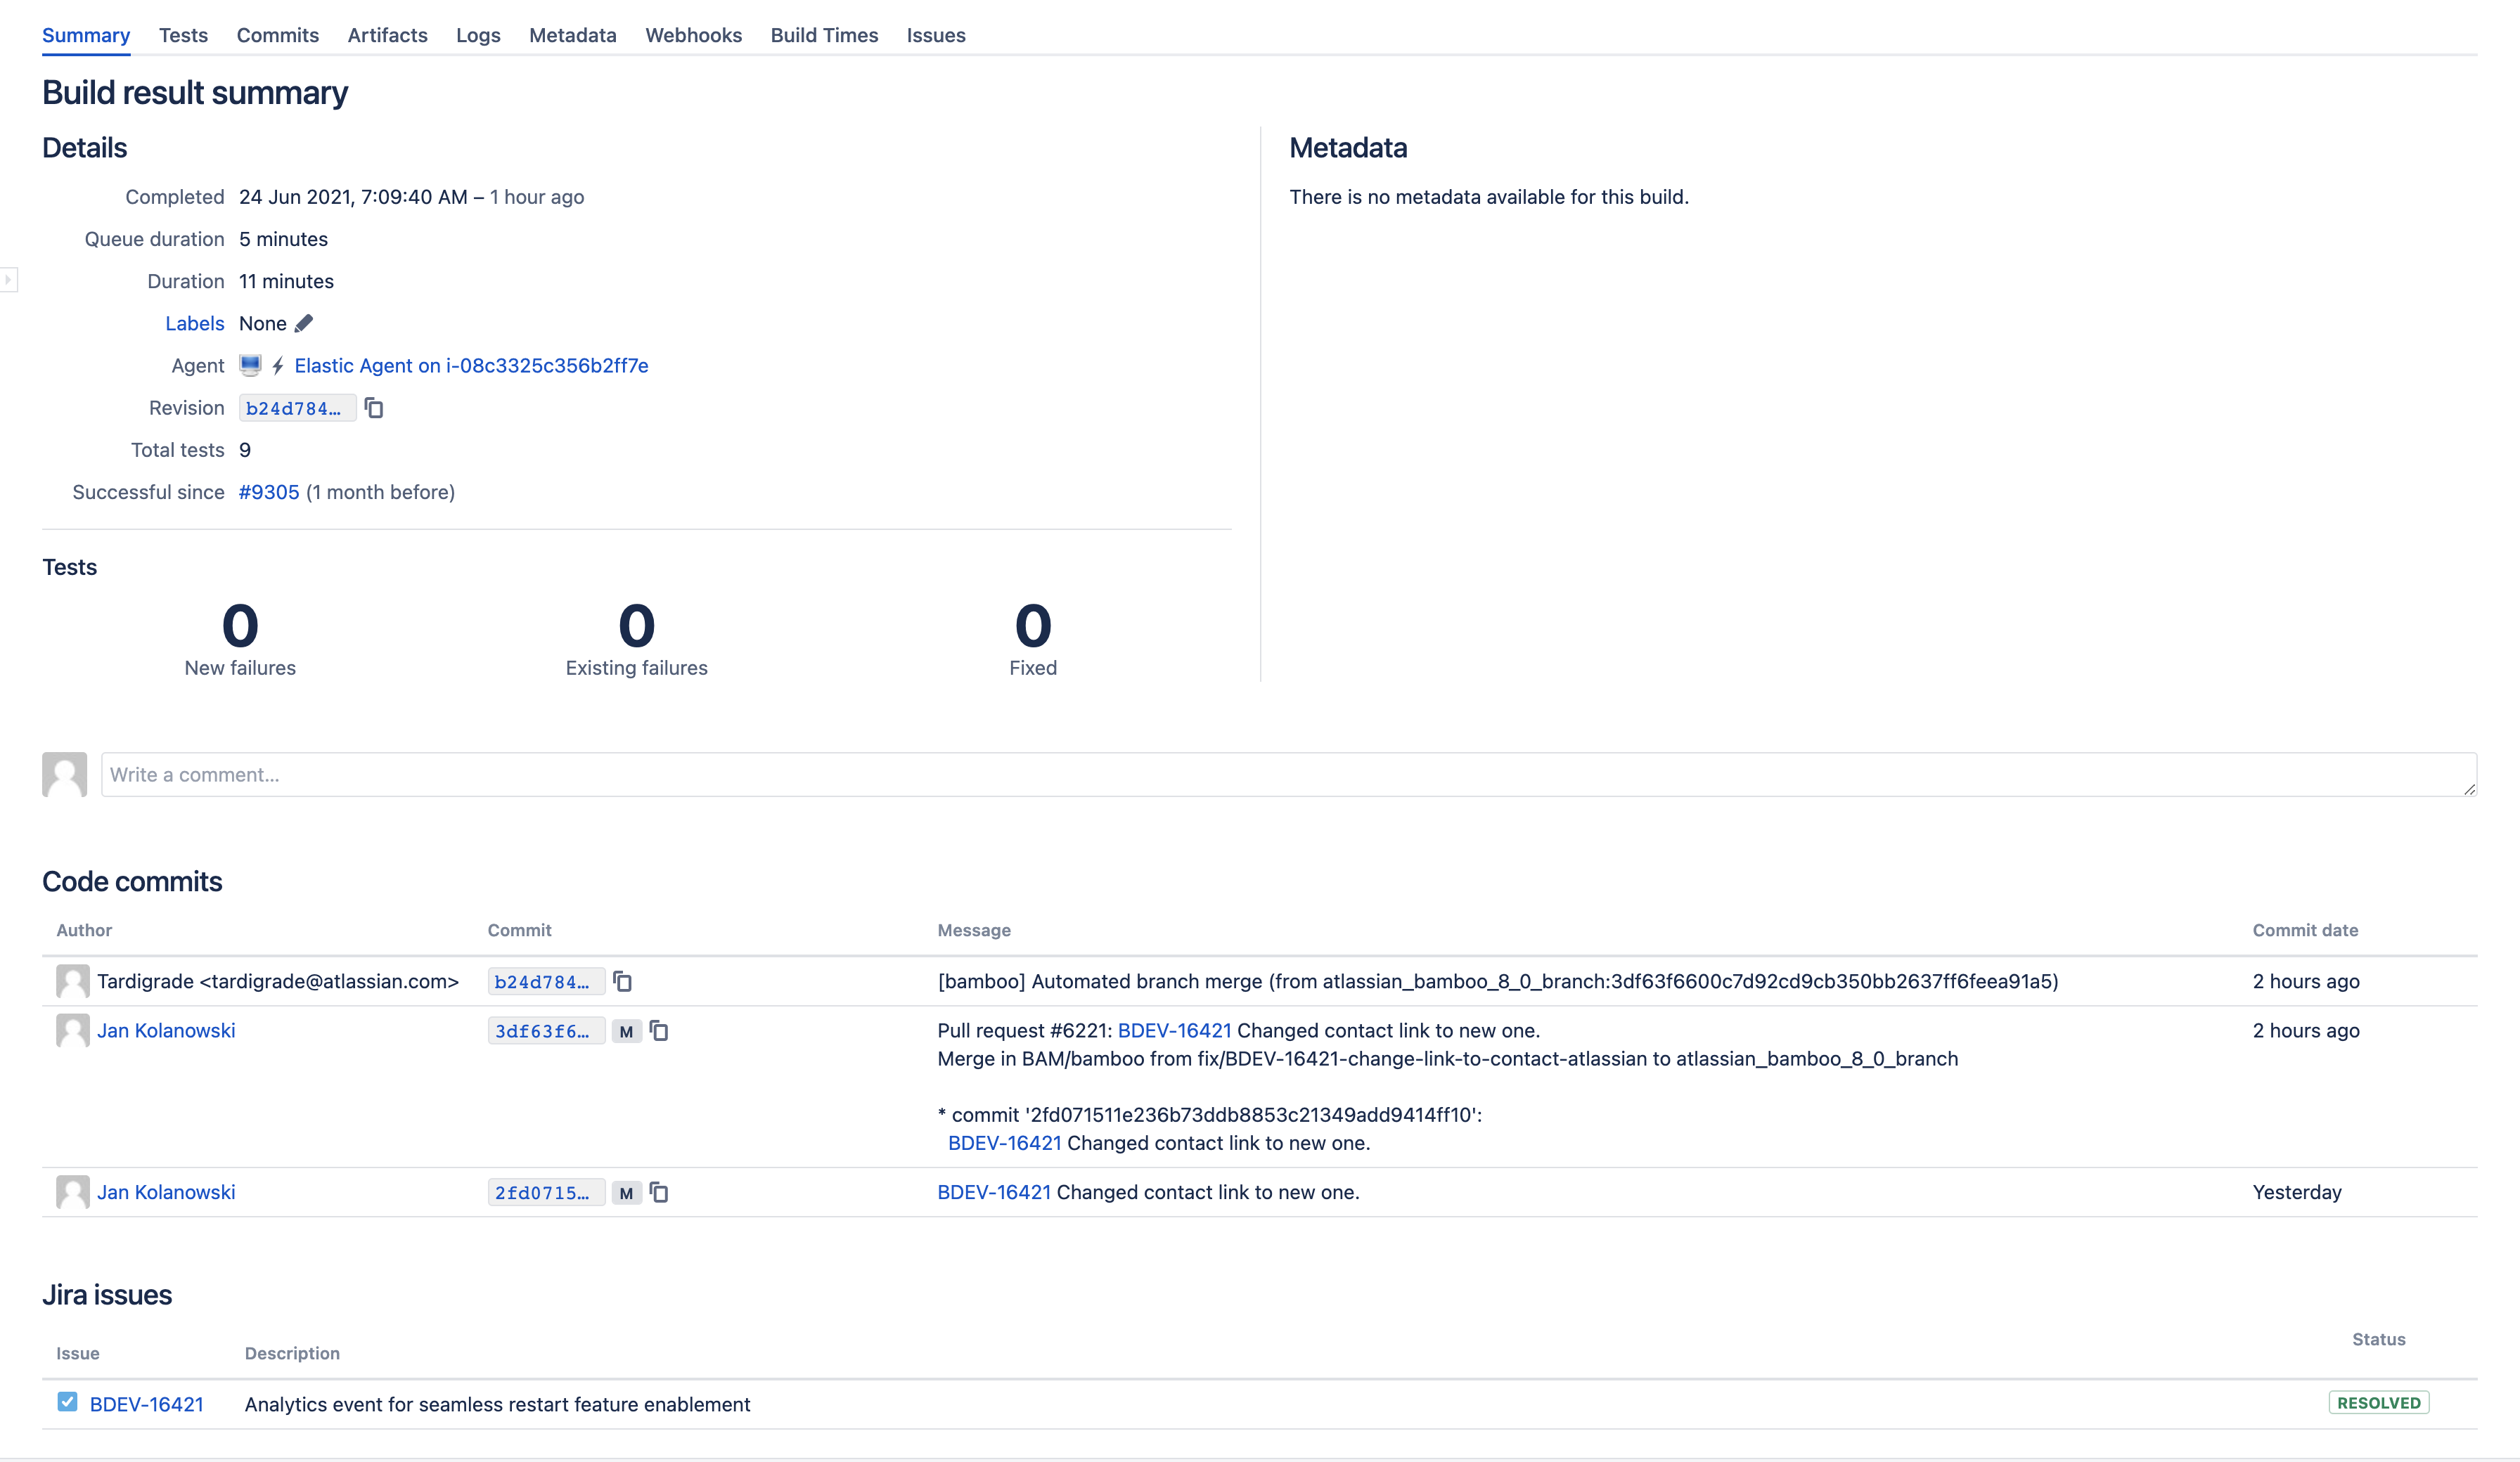 Jira issues in build summary view